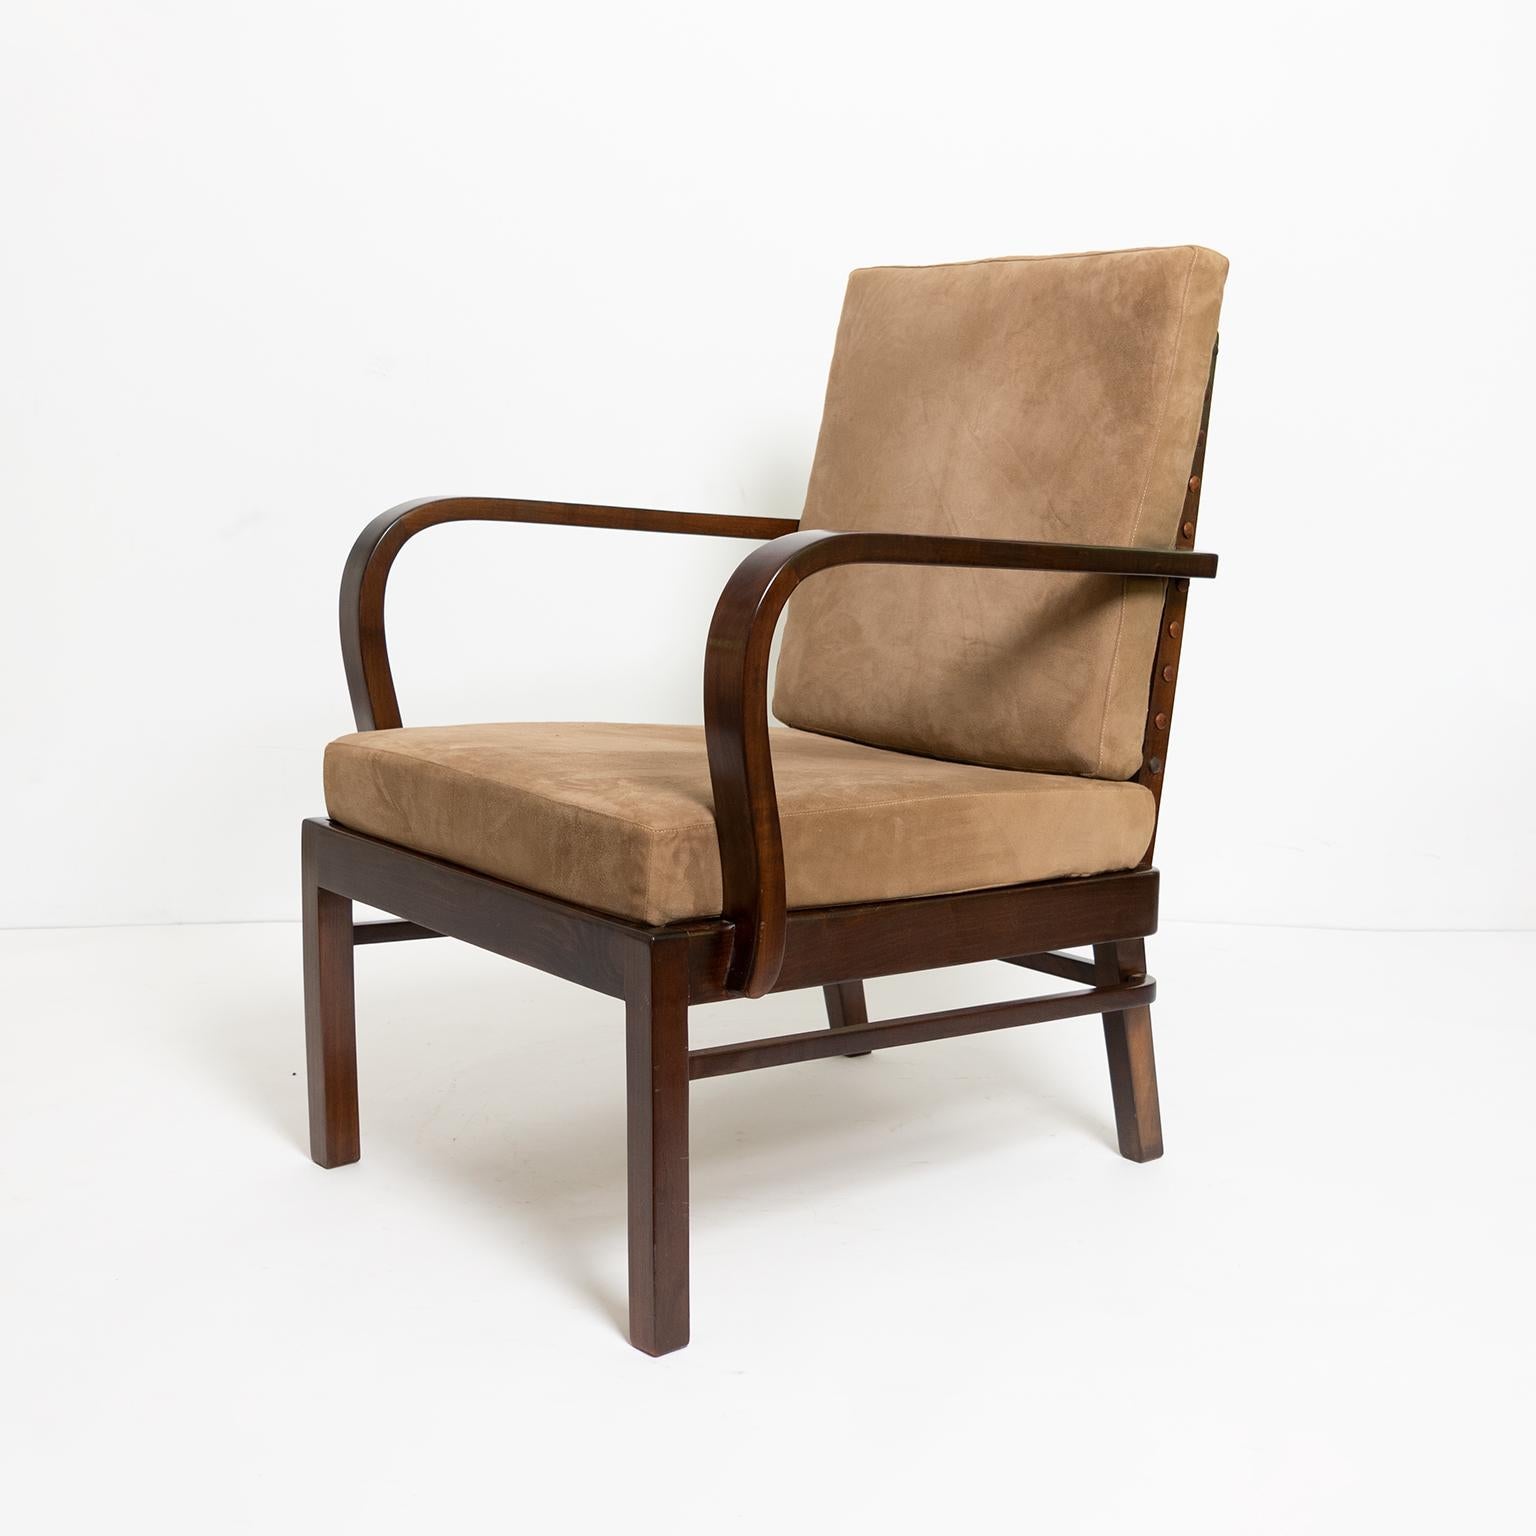 20th Century Modernist 1920s Lounge Chair Designed by Wilhelm Knoll for Knoll Antimott